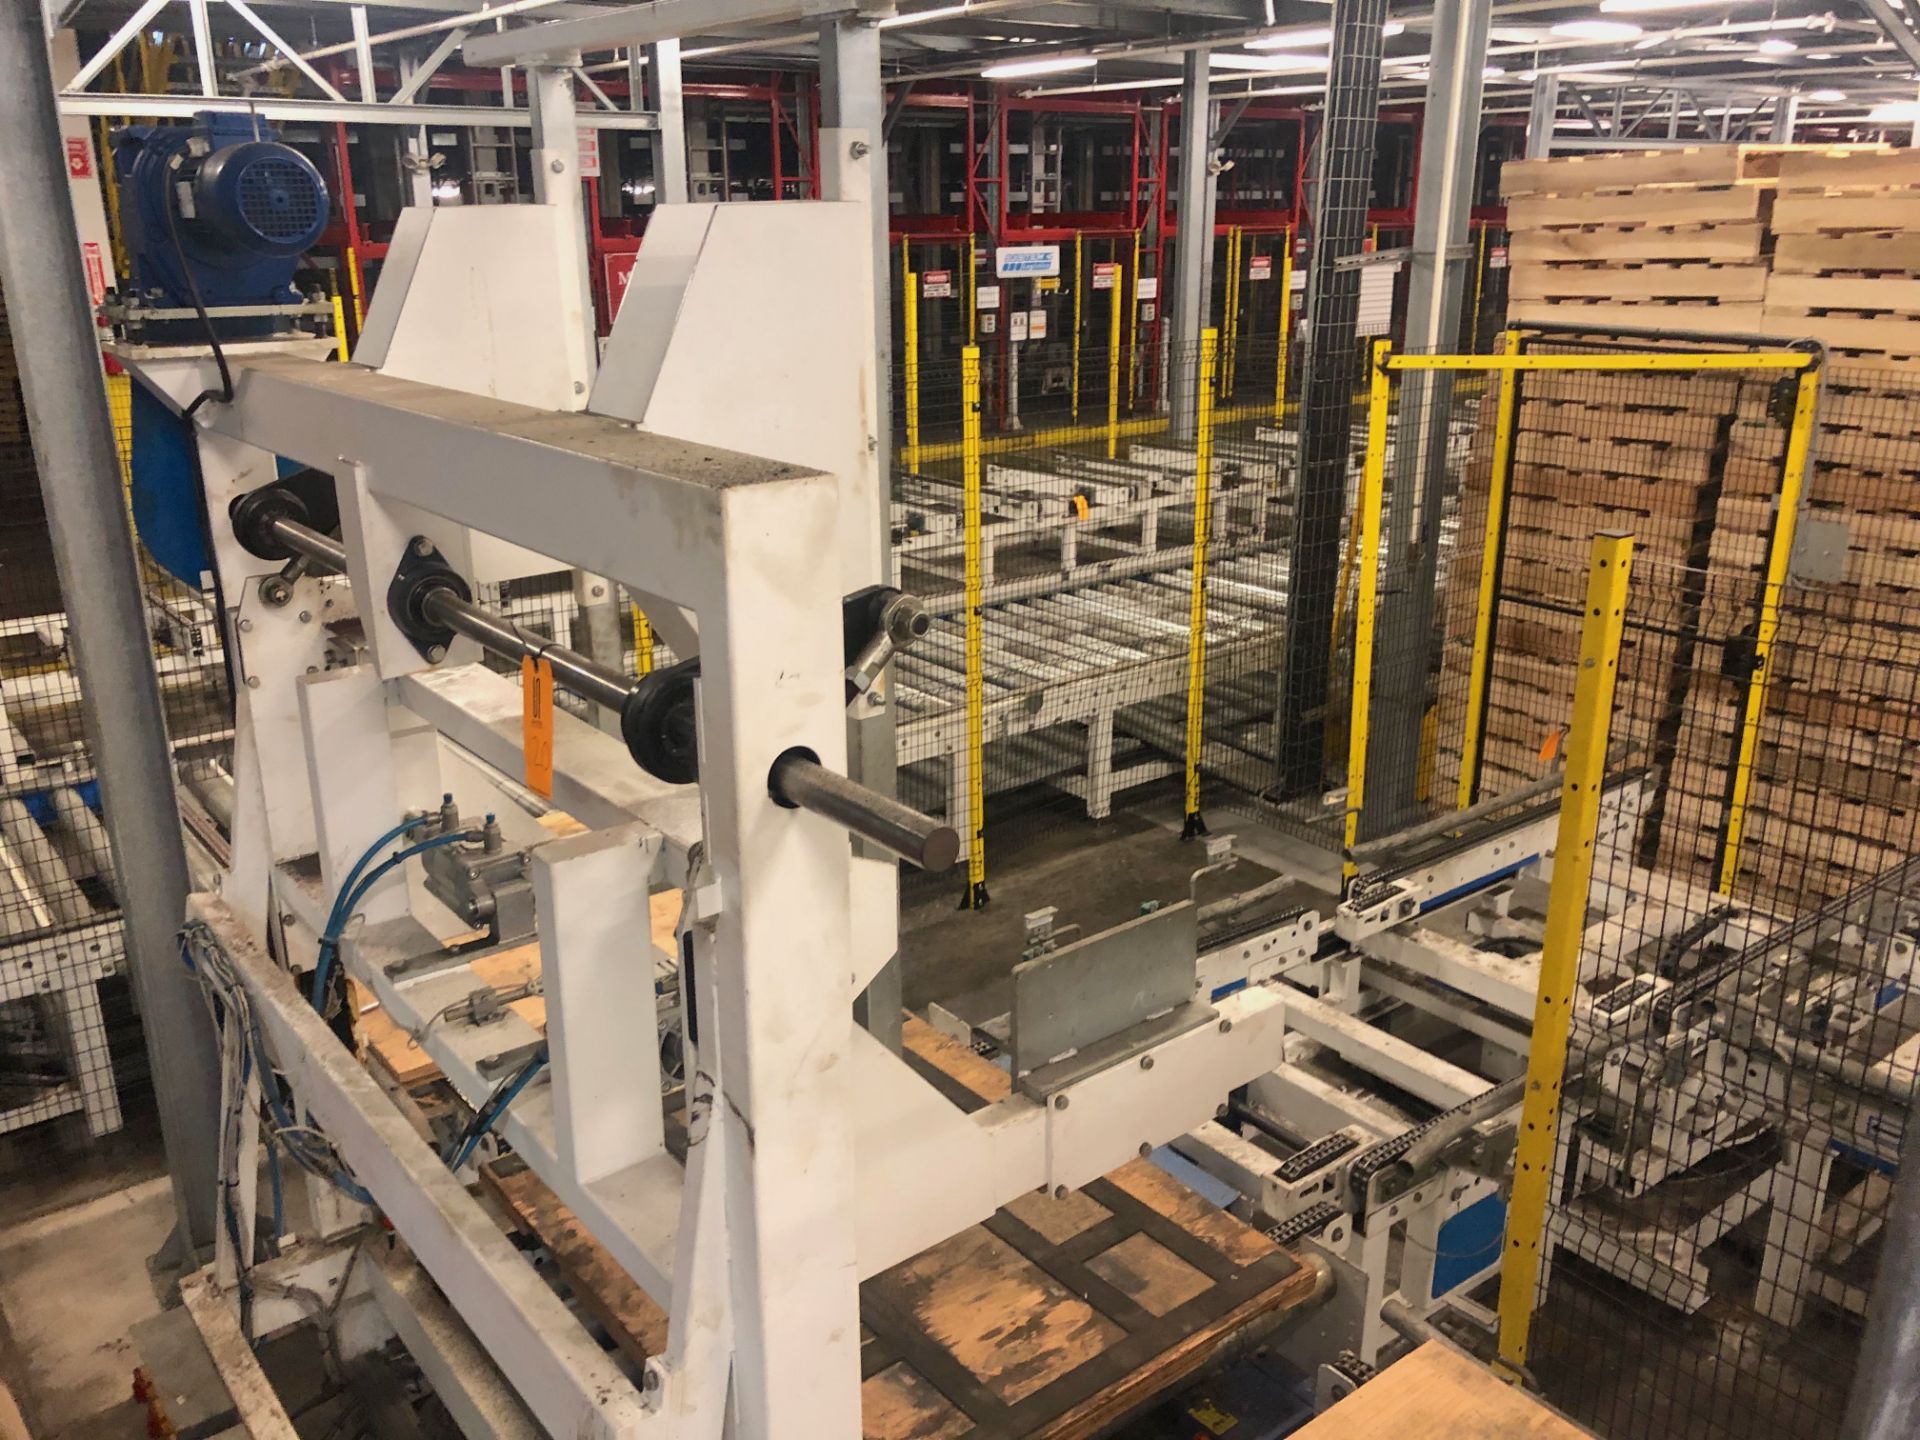 Pallet Dispenser Loading Area (to Feed Pallets to Robotic Palletizers) - Image 11 of 17